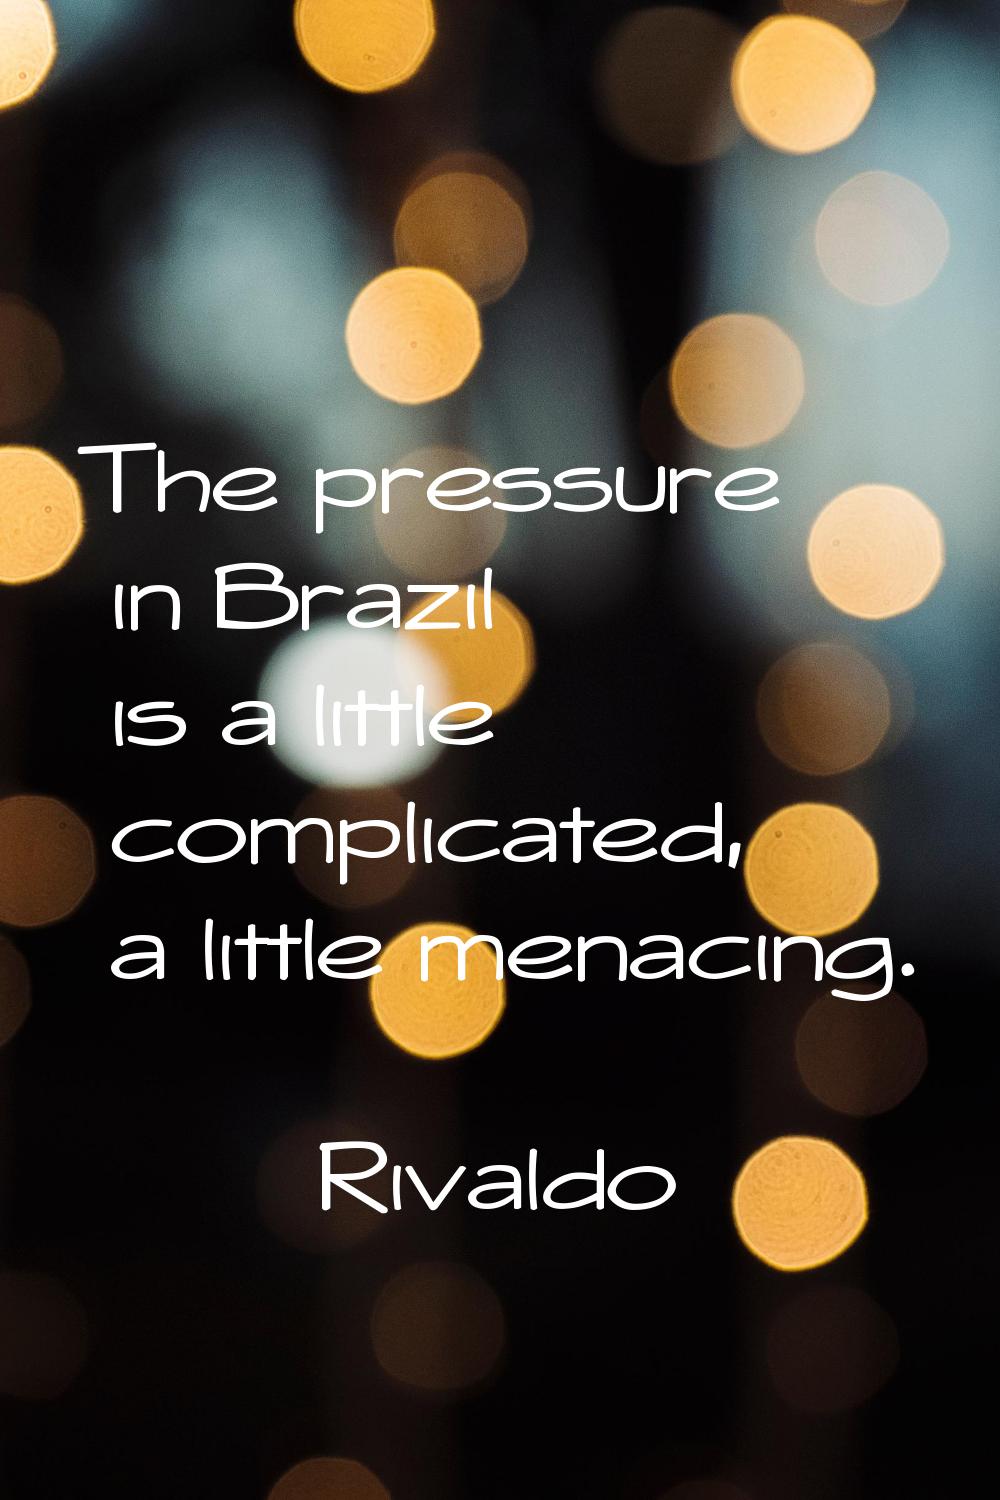 The pressure in Brazil is a little complicated, a little menacing.